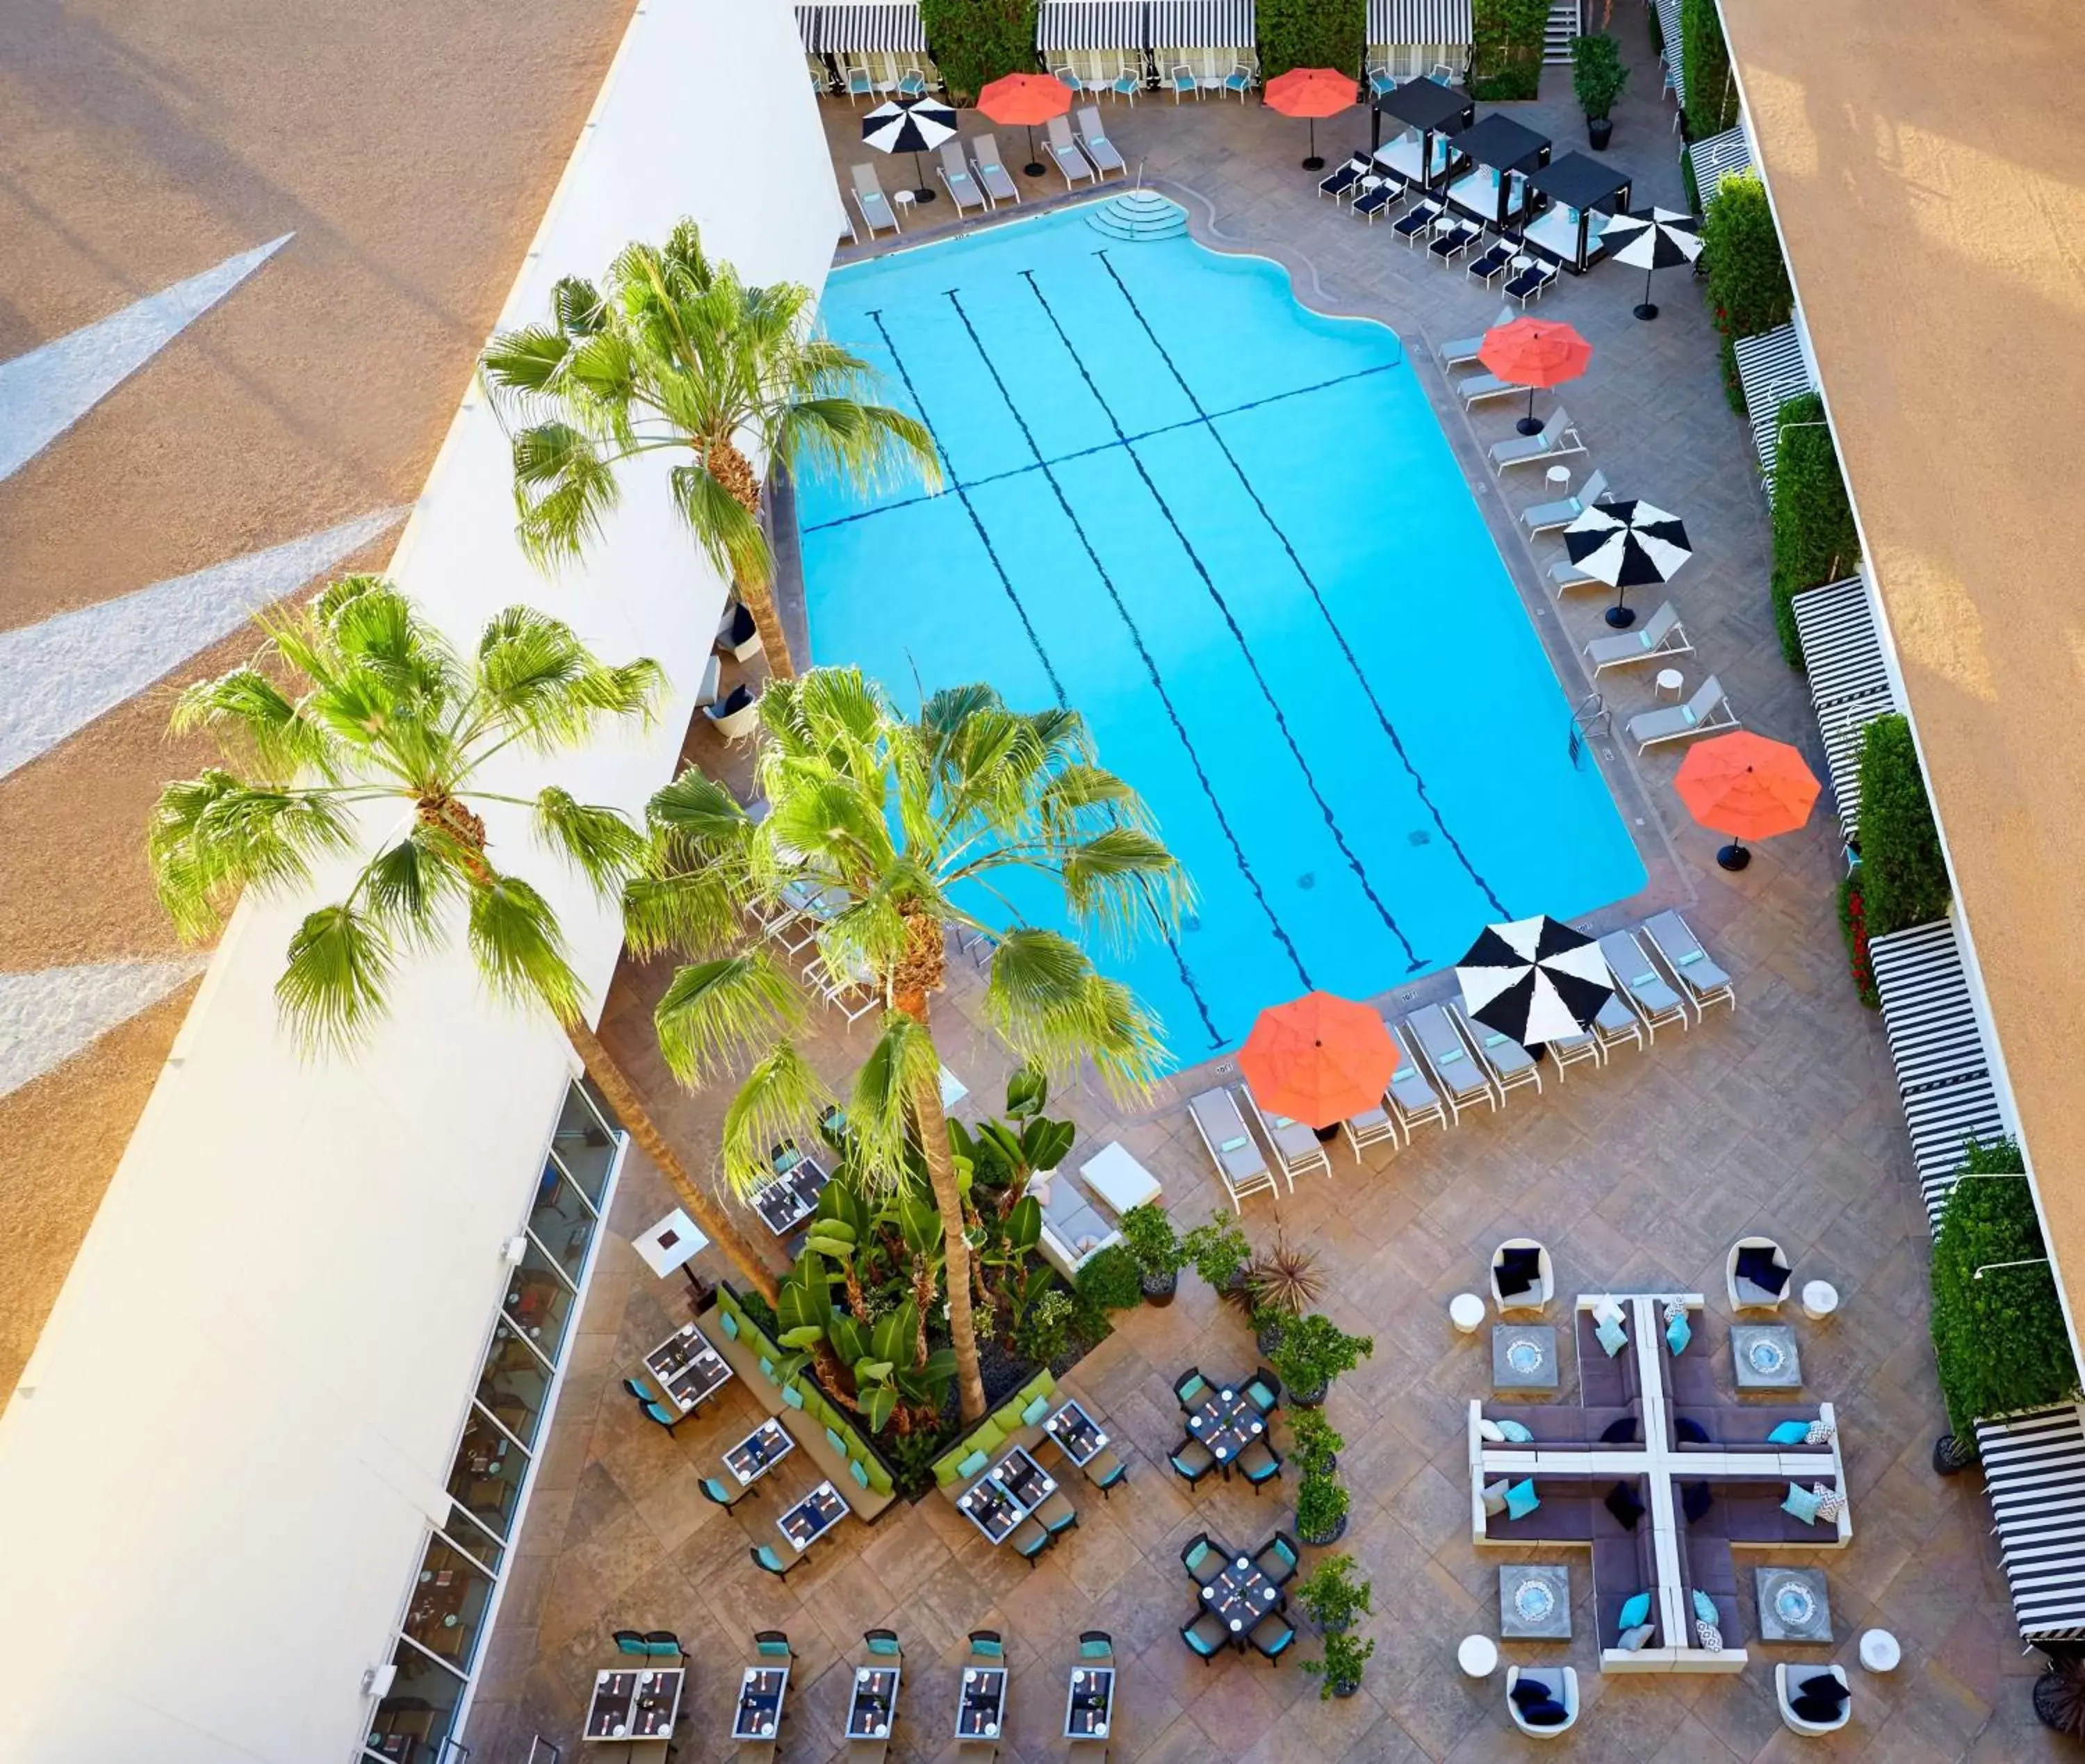 Pool view, Bird's-eye View in The Beverly Hilton